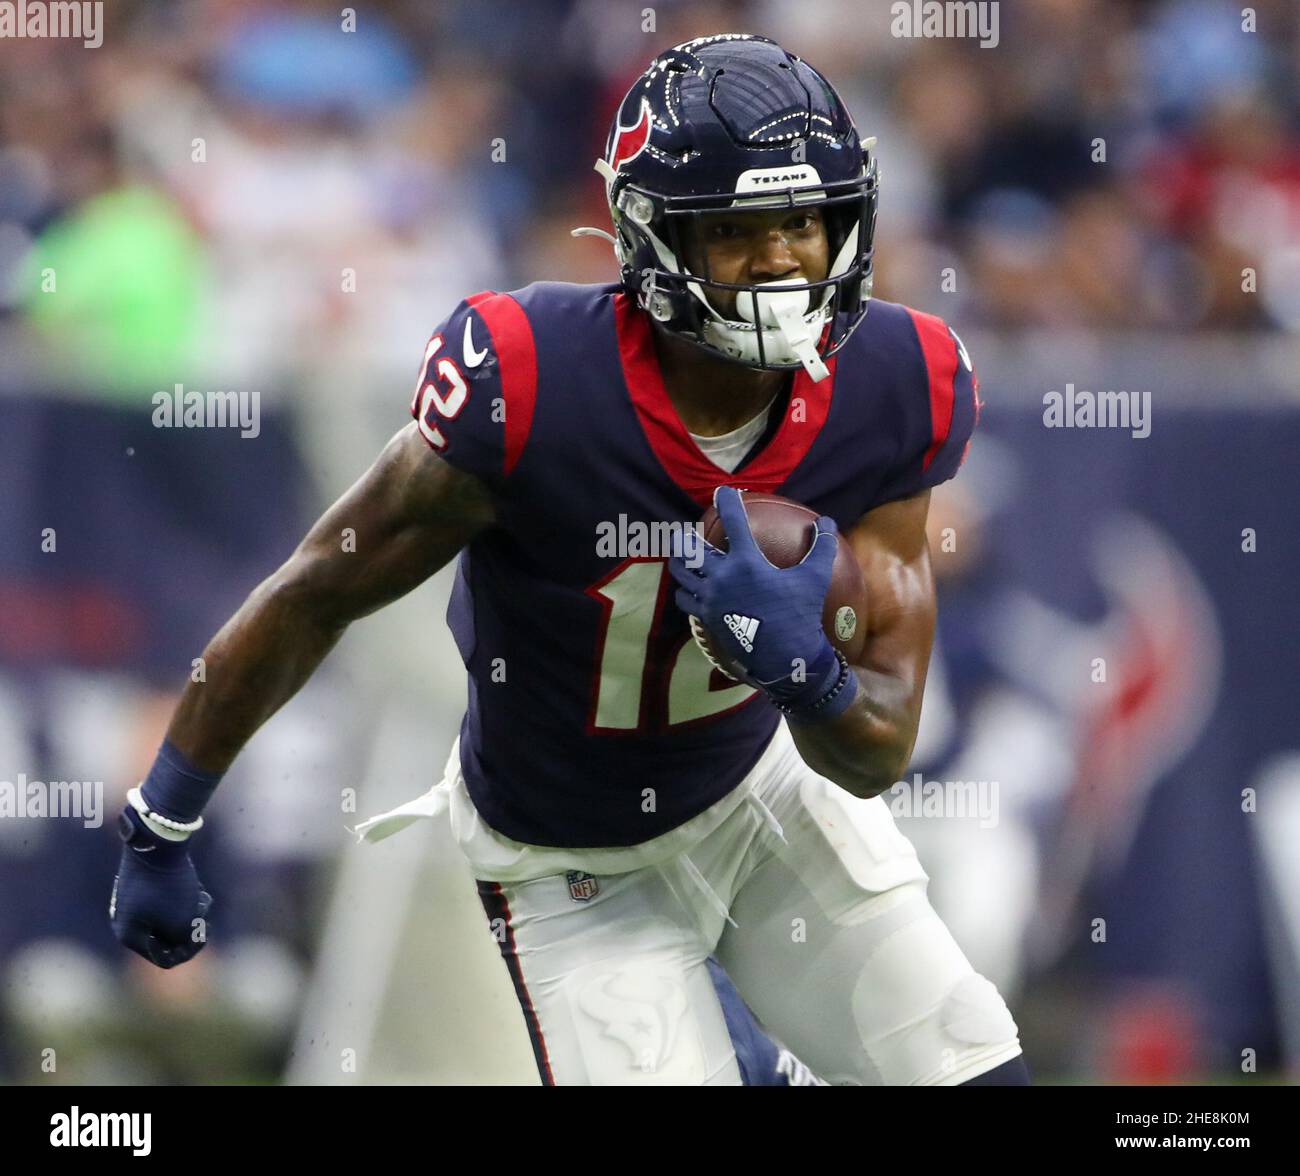 January 9, 2022: Houston Texans wide receiver Nico Collins (12) carries the  ball after a catch during an NFL game between the Texans and the Titans on  Jan. 9, 2022 in Houston,